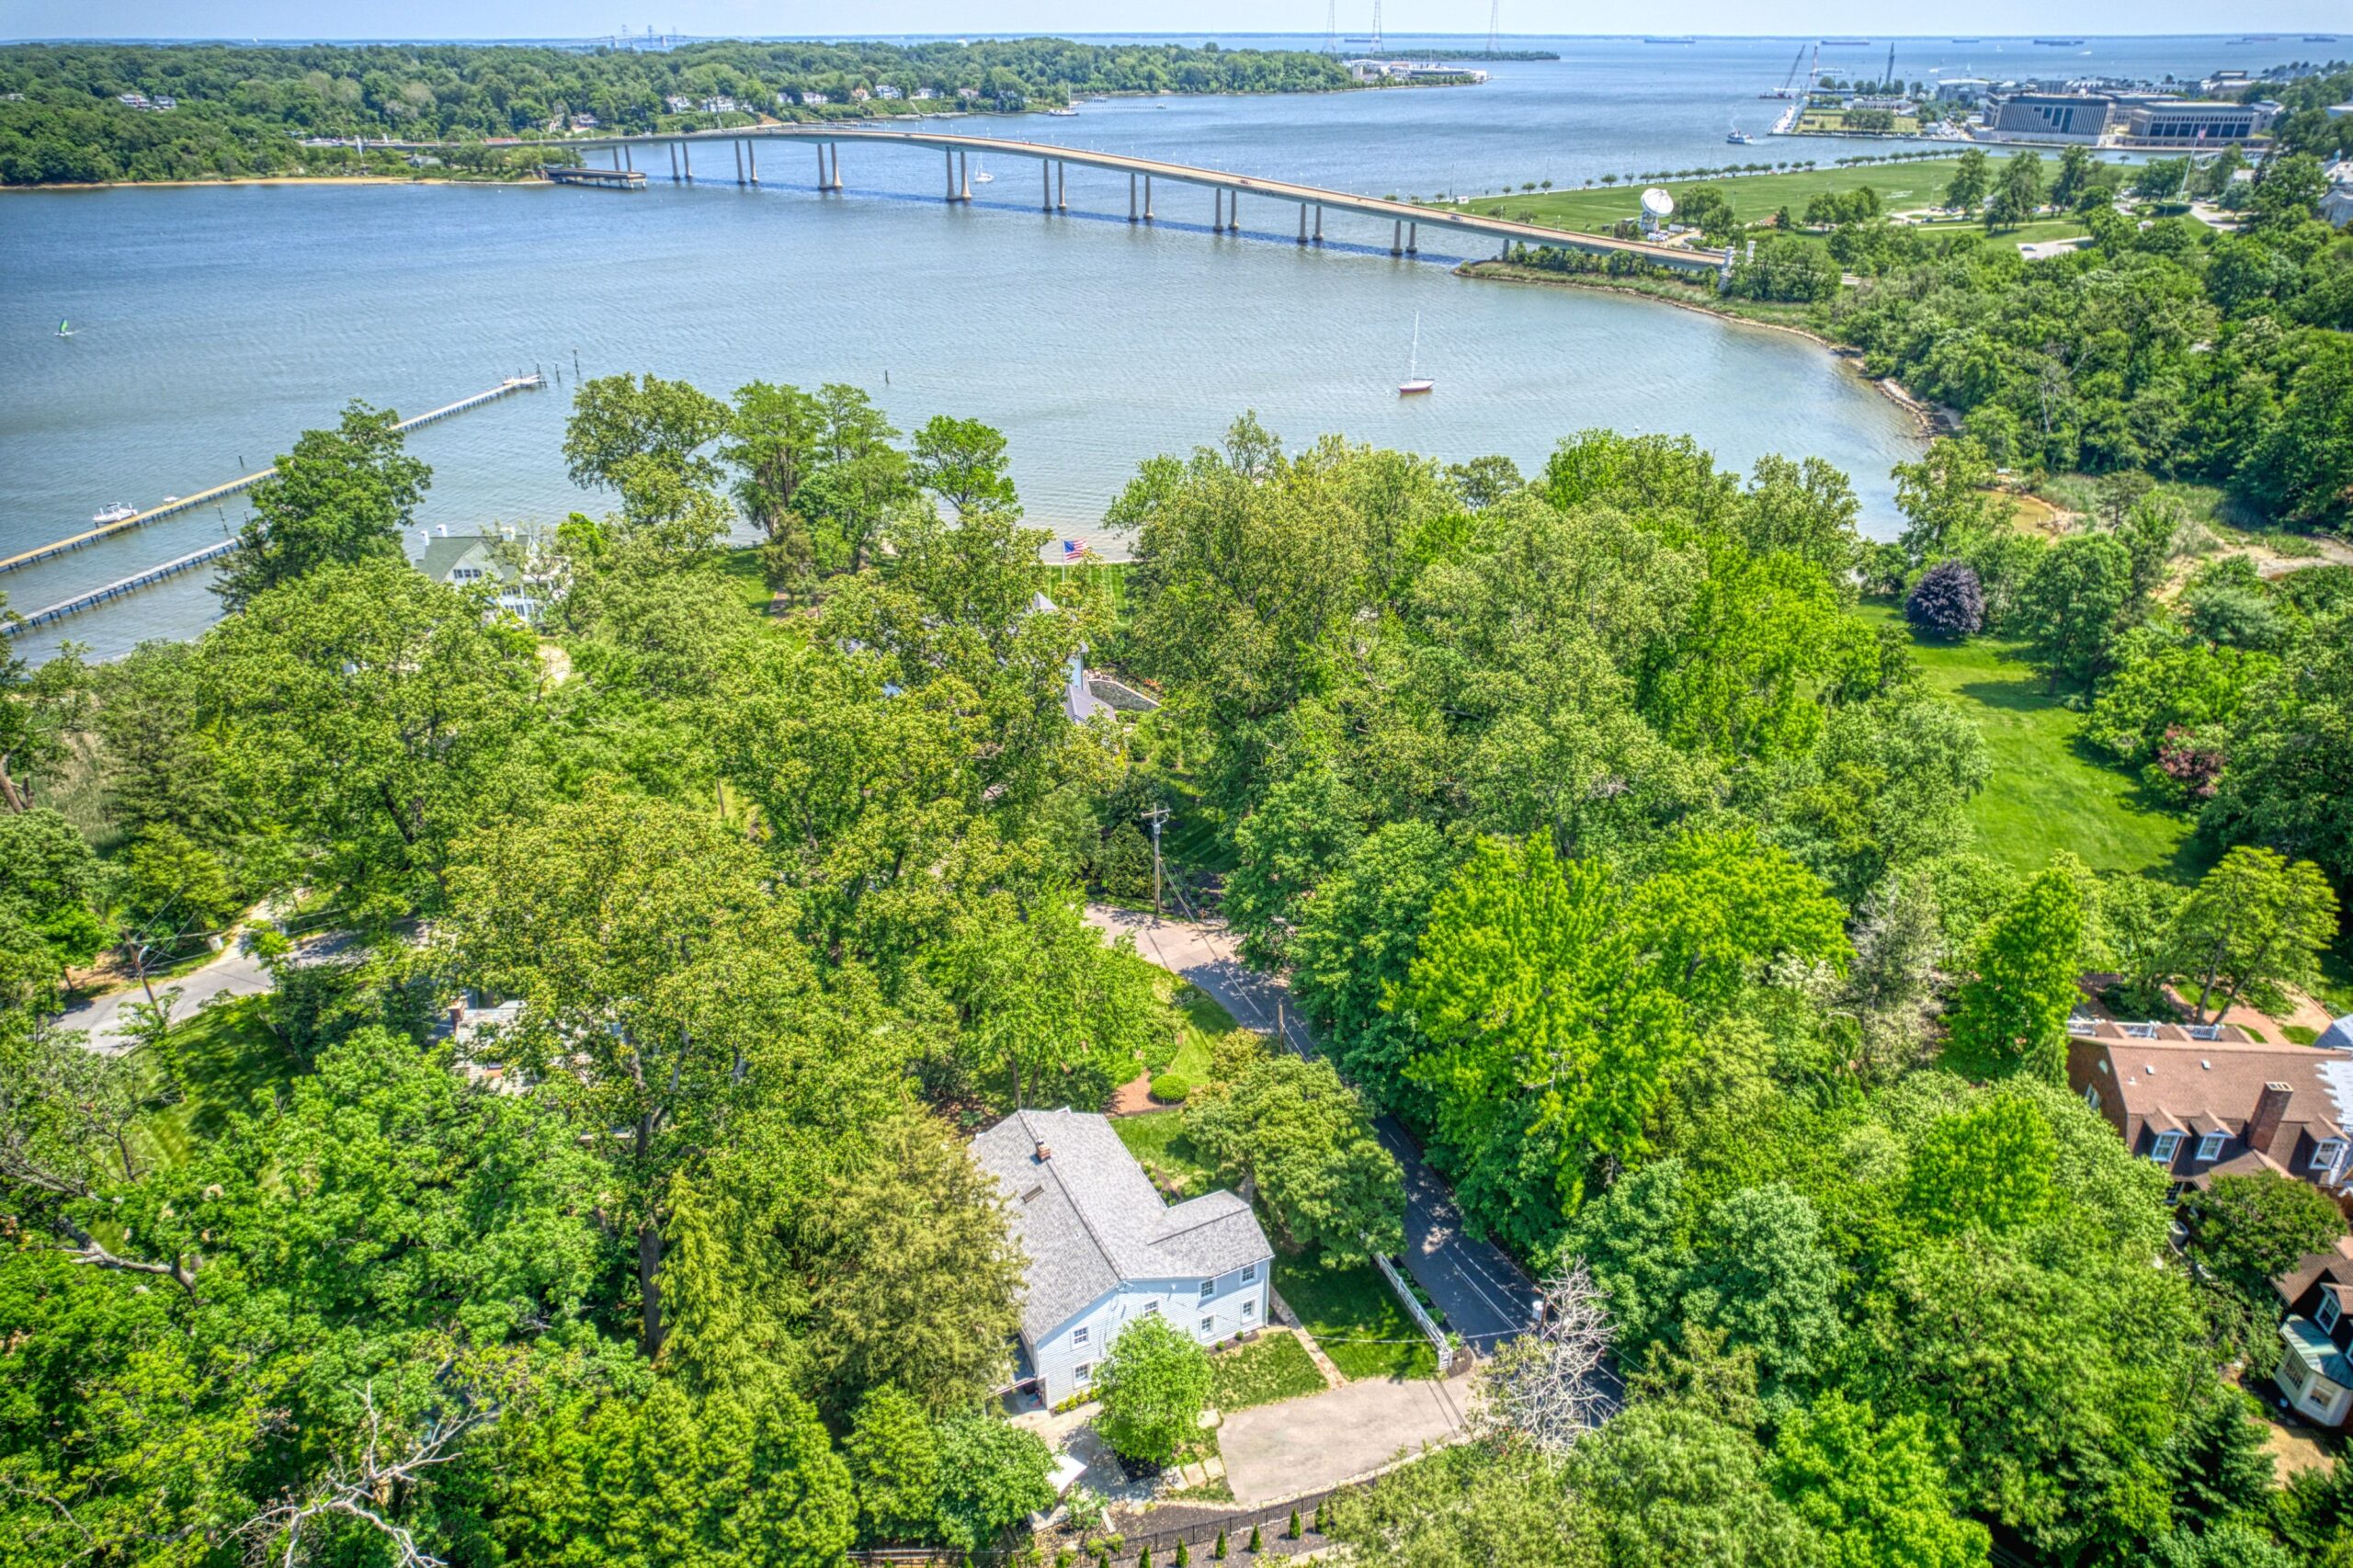 Professional aerial exterior photo of 209 Norwood Road, Annapolis, MD - showing the home in the foreground and the Severn River in the background, visible to thehome